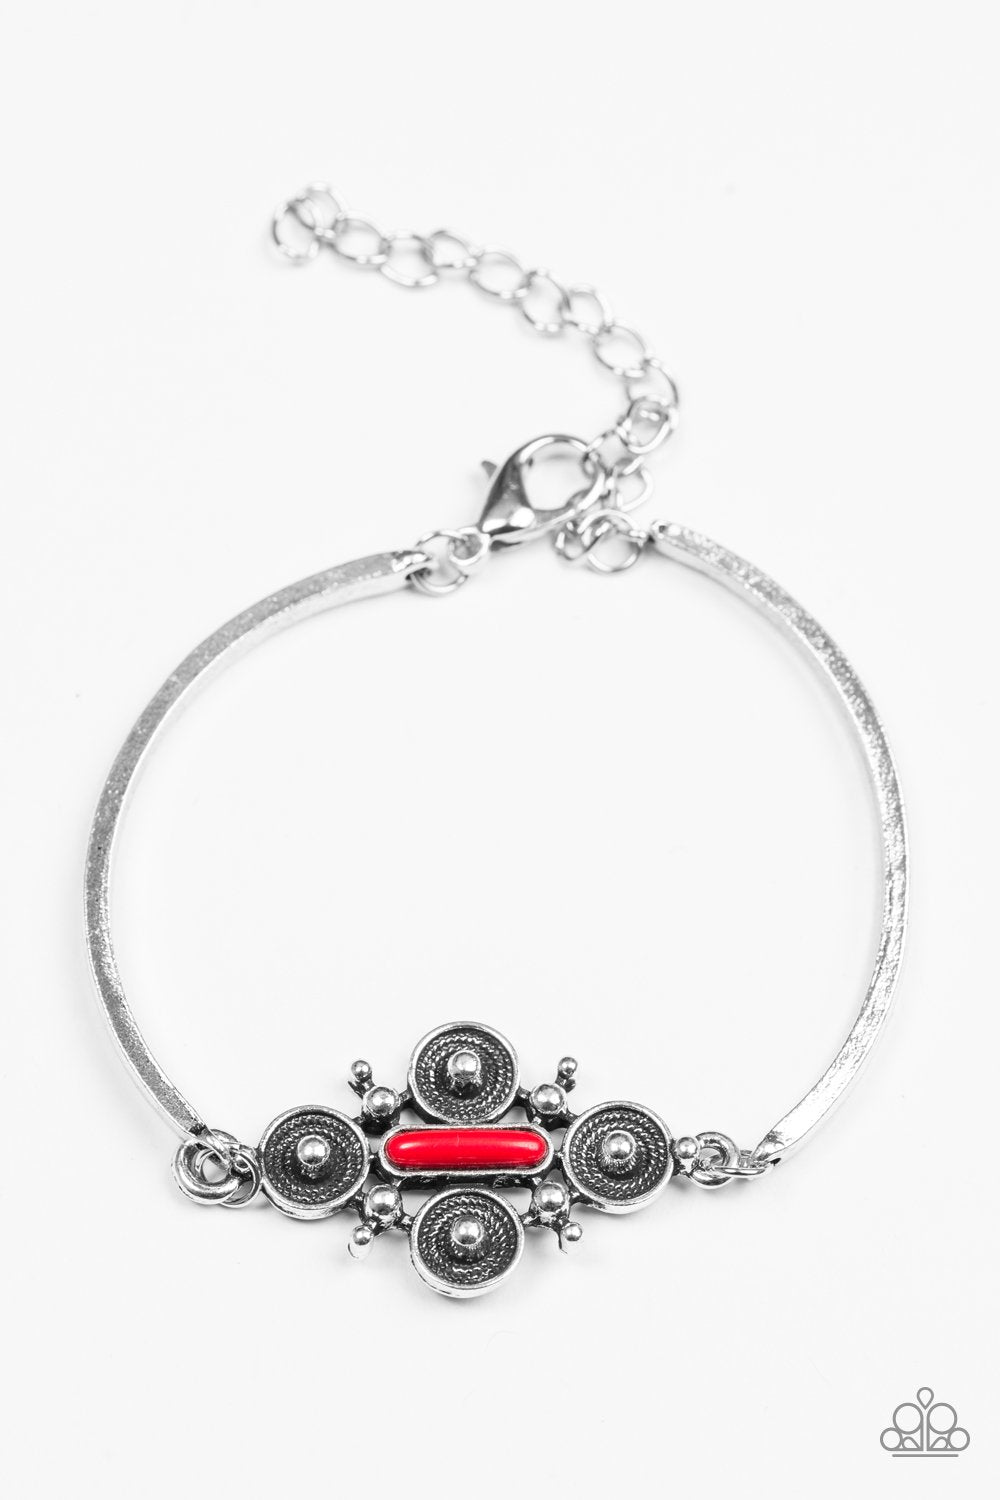 Mesa Flower Silver and Red Bracelet - Paparazzi Accessories-CarasShop.com - $5 Jewelry by Cara Jewels